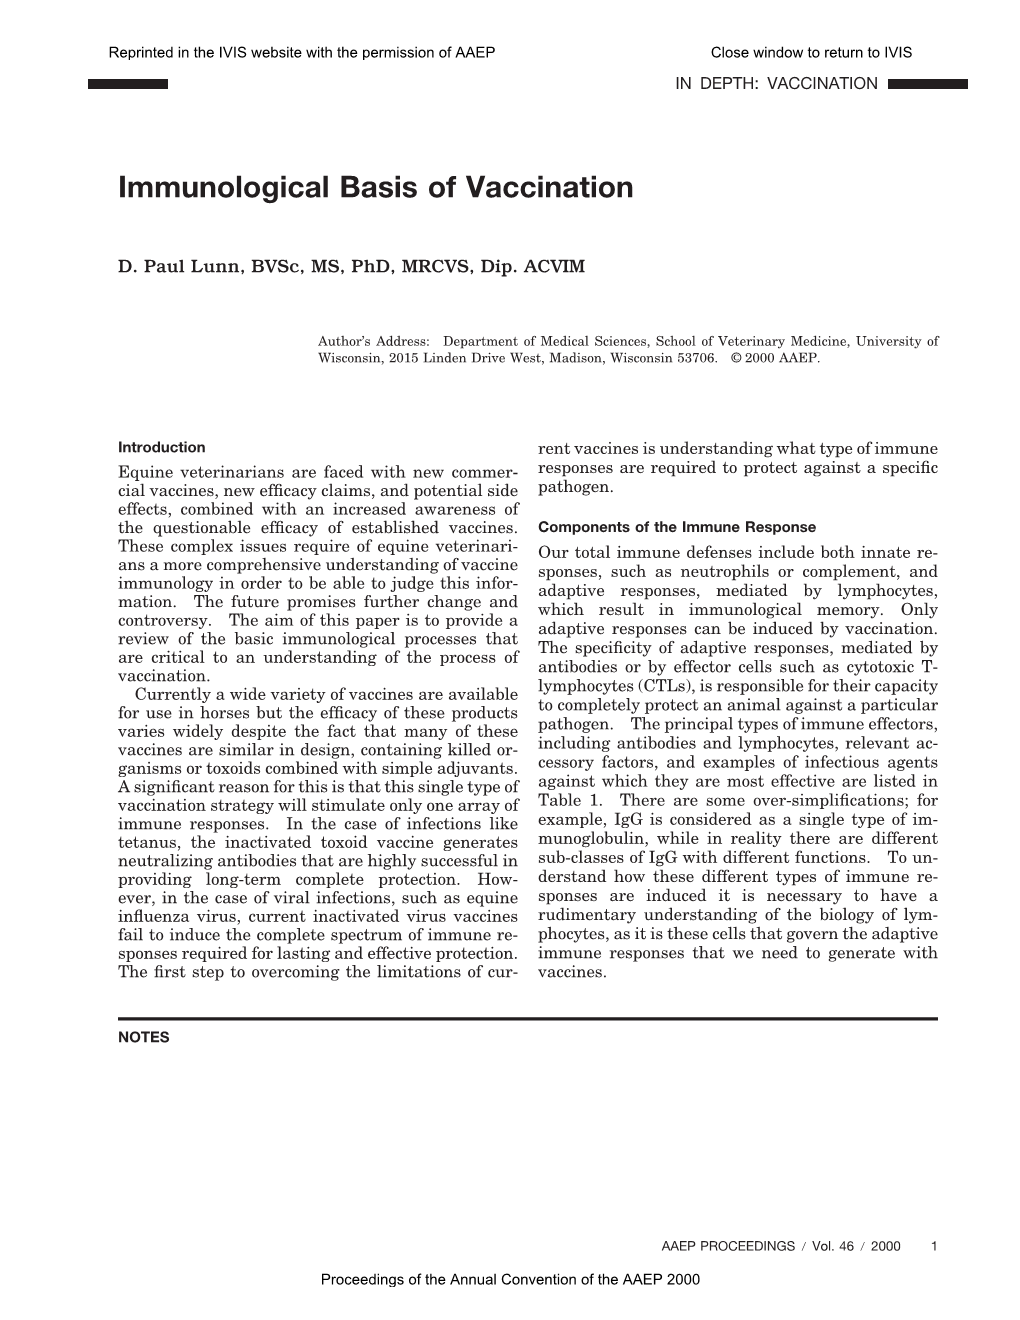 Immunological Basis of Vaccination